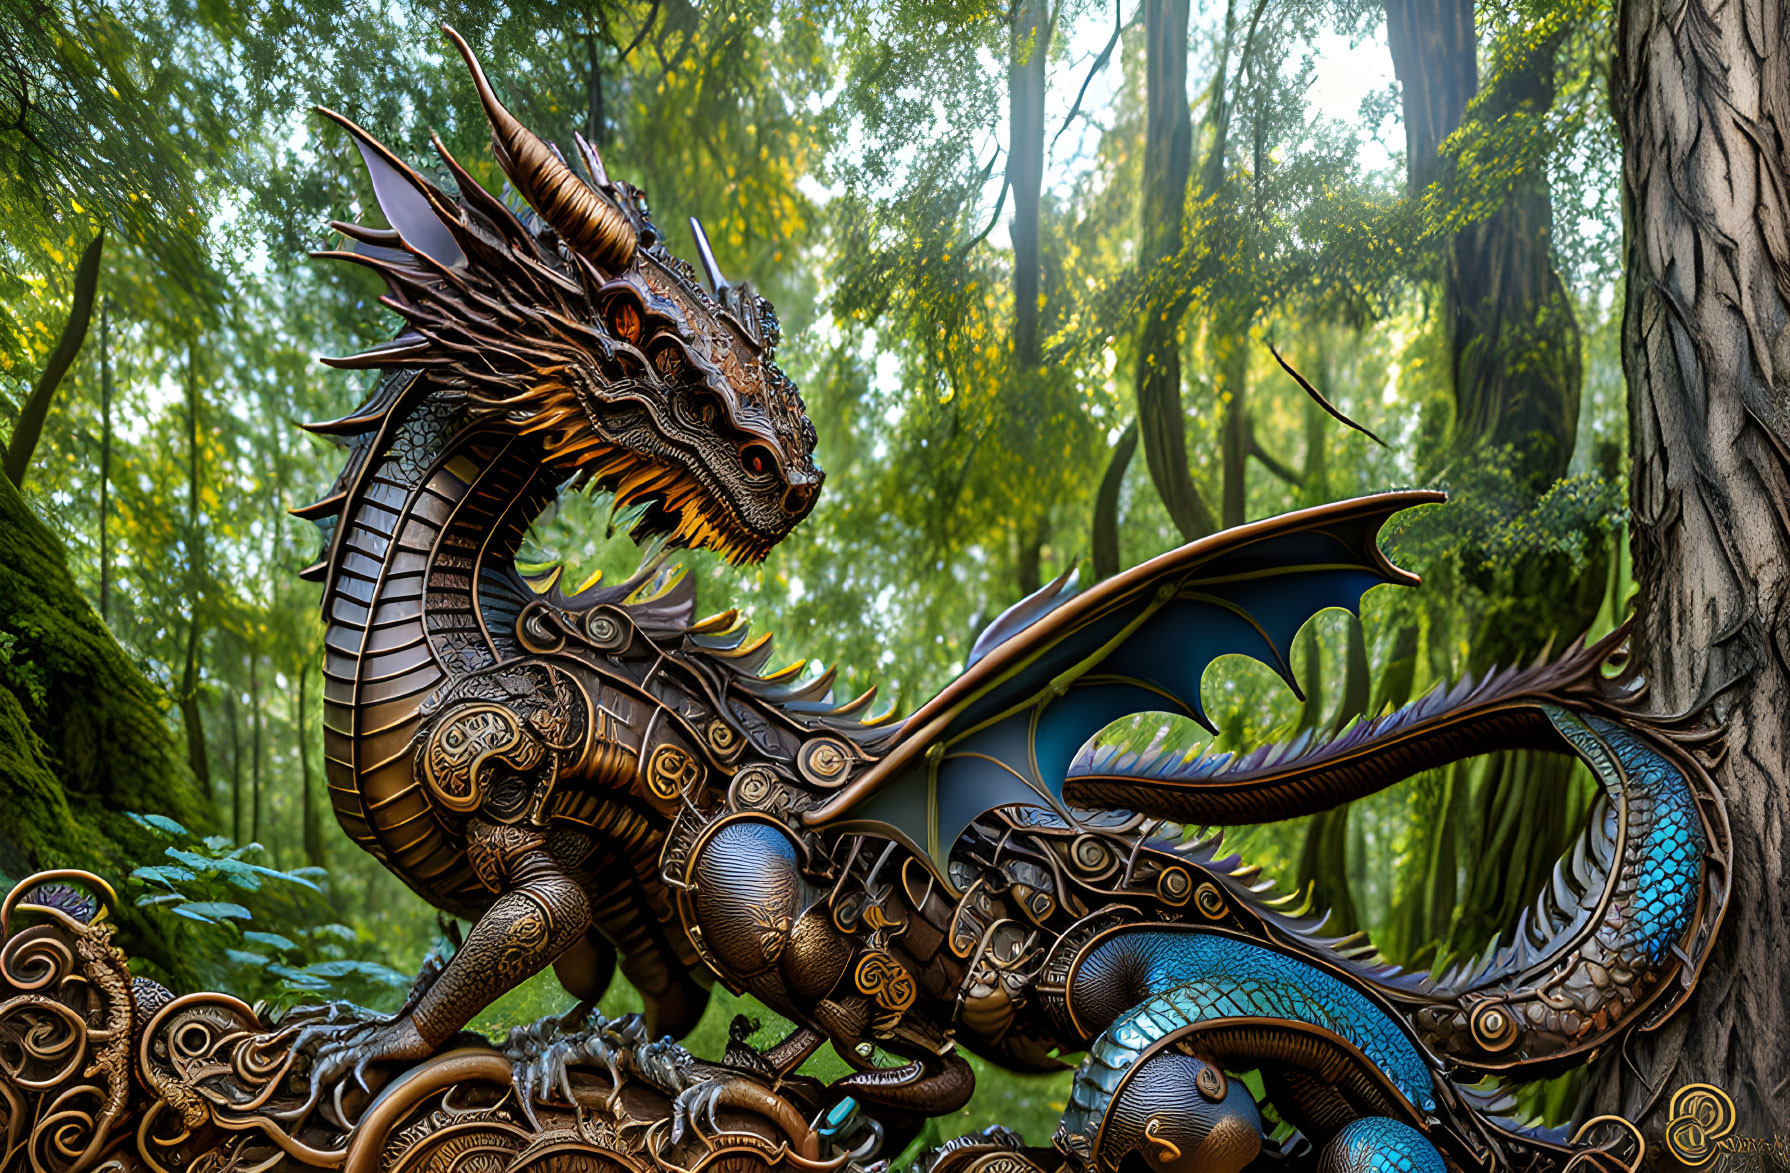 Mechanical dragon with bronze and blue scales in lush forest setting